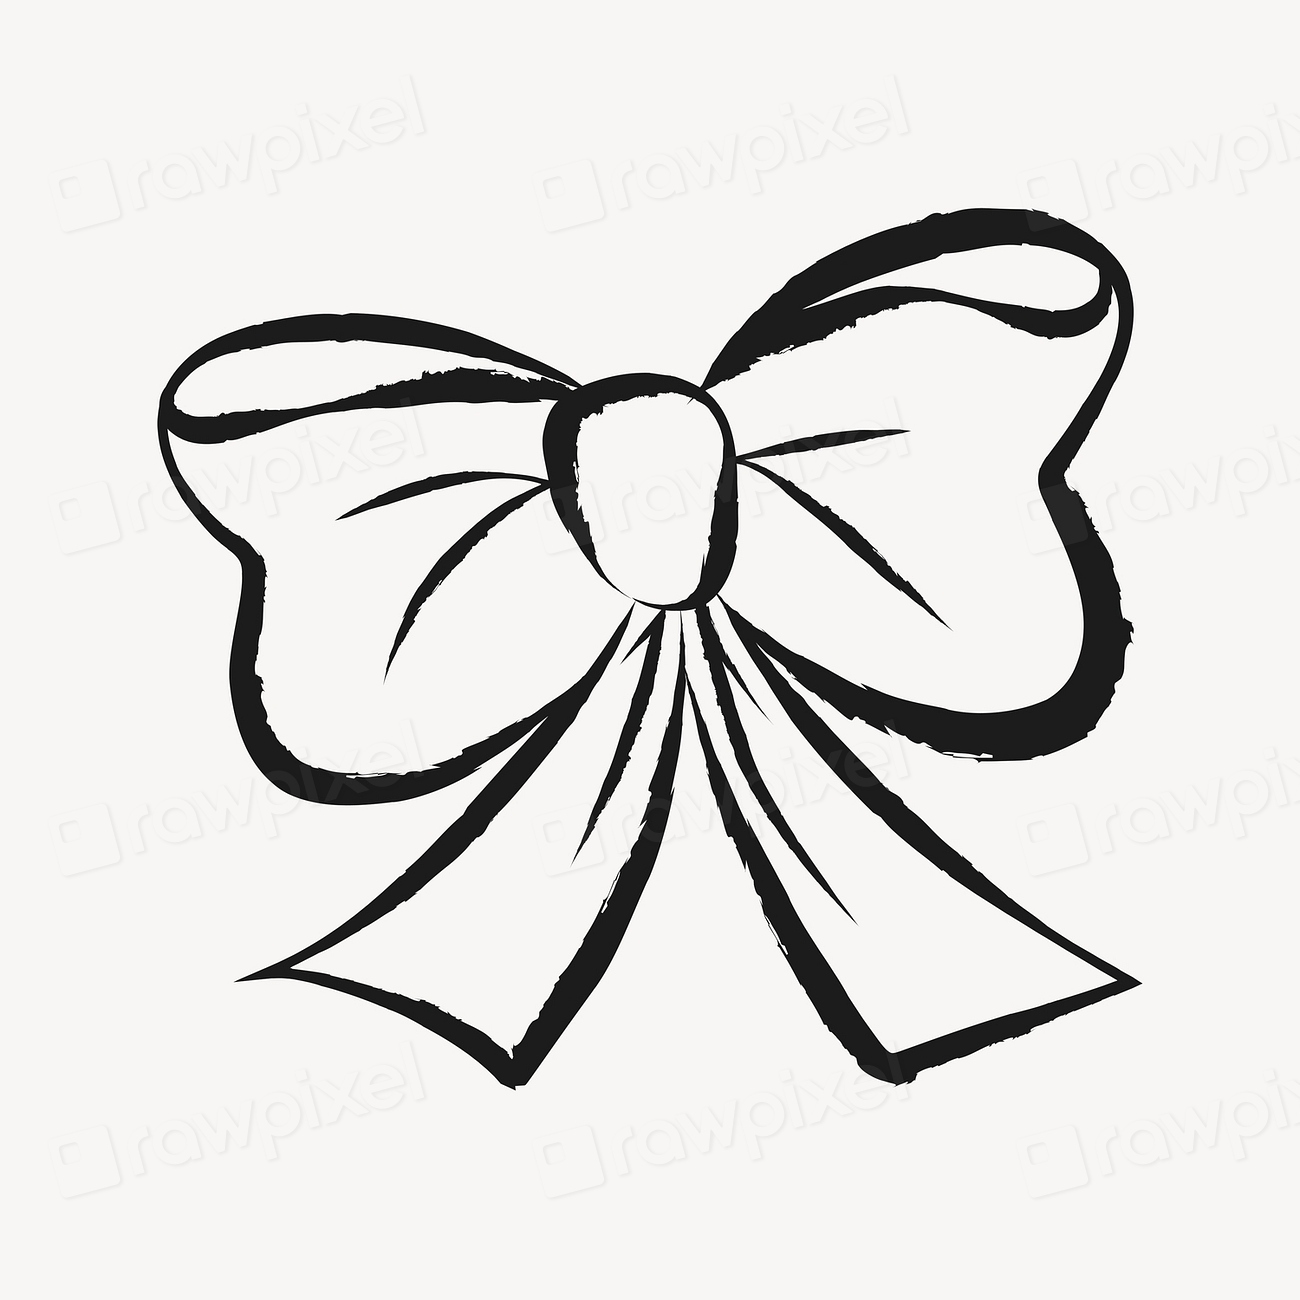 Bow sticker, cute doodle in black | Free PSD Illustration - rawpixel